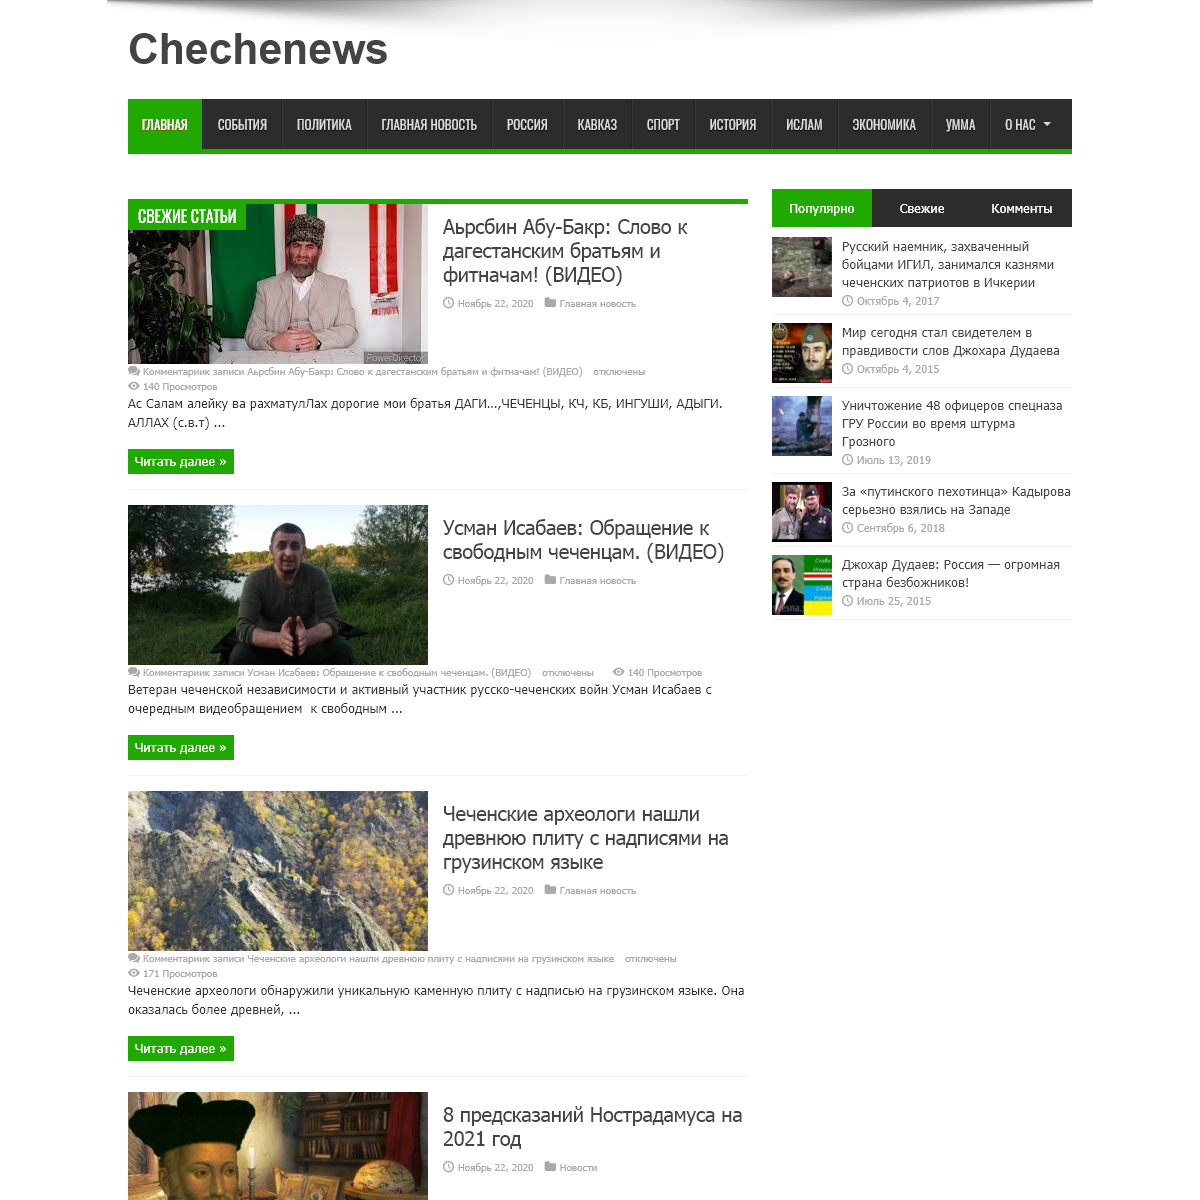 A complete backup of chechenews.com